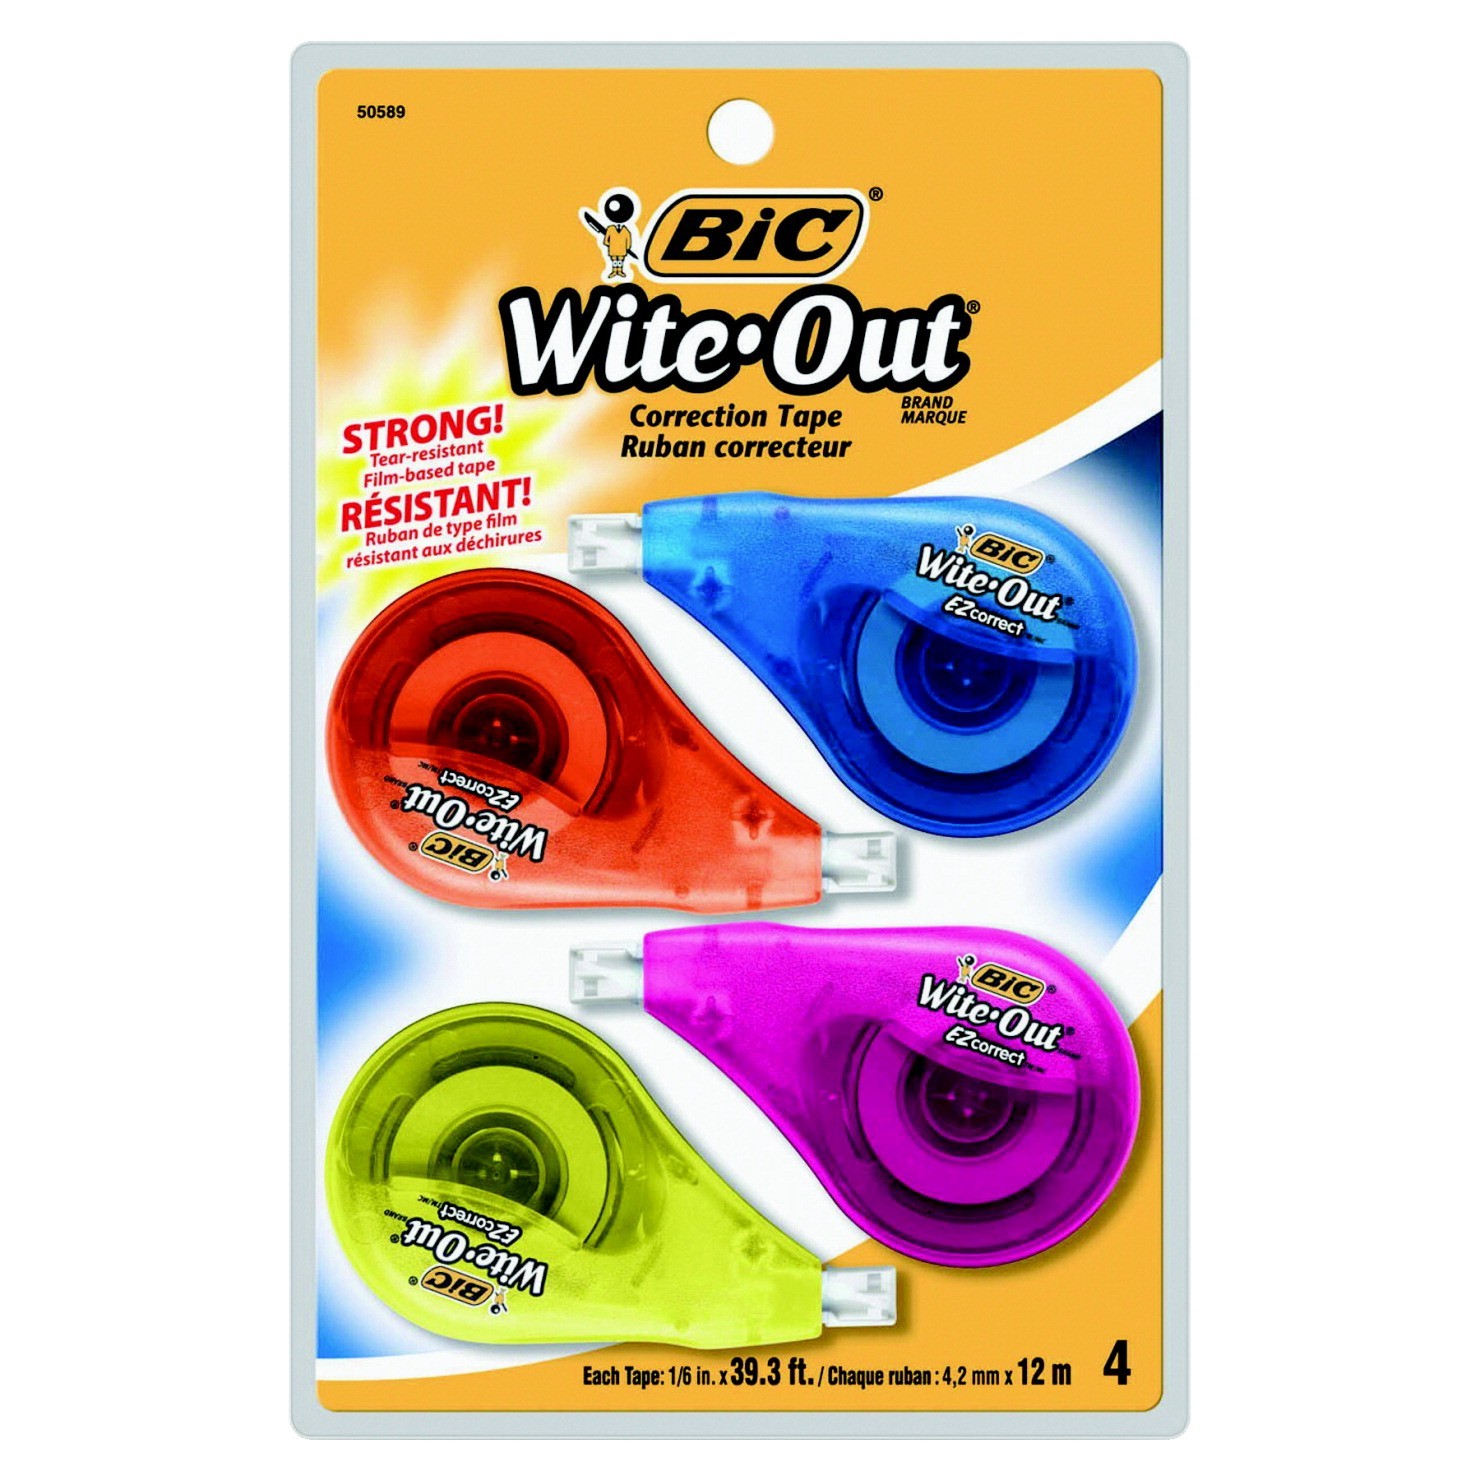 BIC Wite-Out EZ Correct Correction Tape, 1/6 in X 39.3 ft, White, Pack of 4